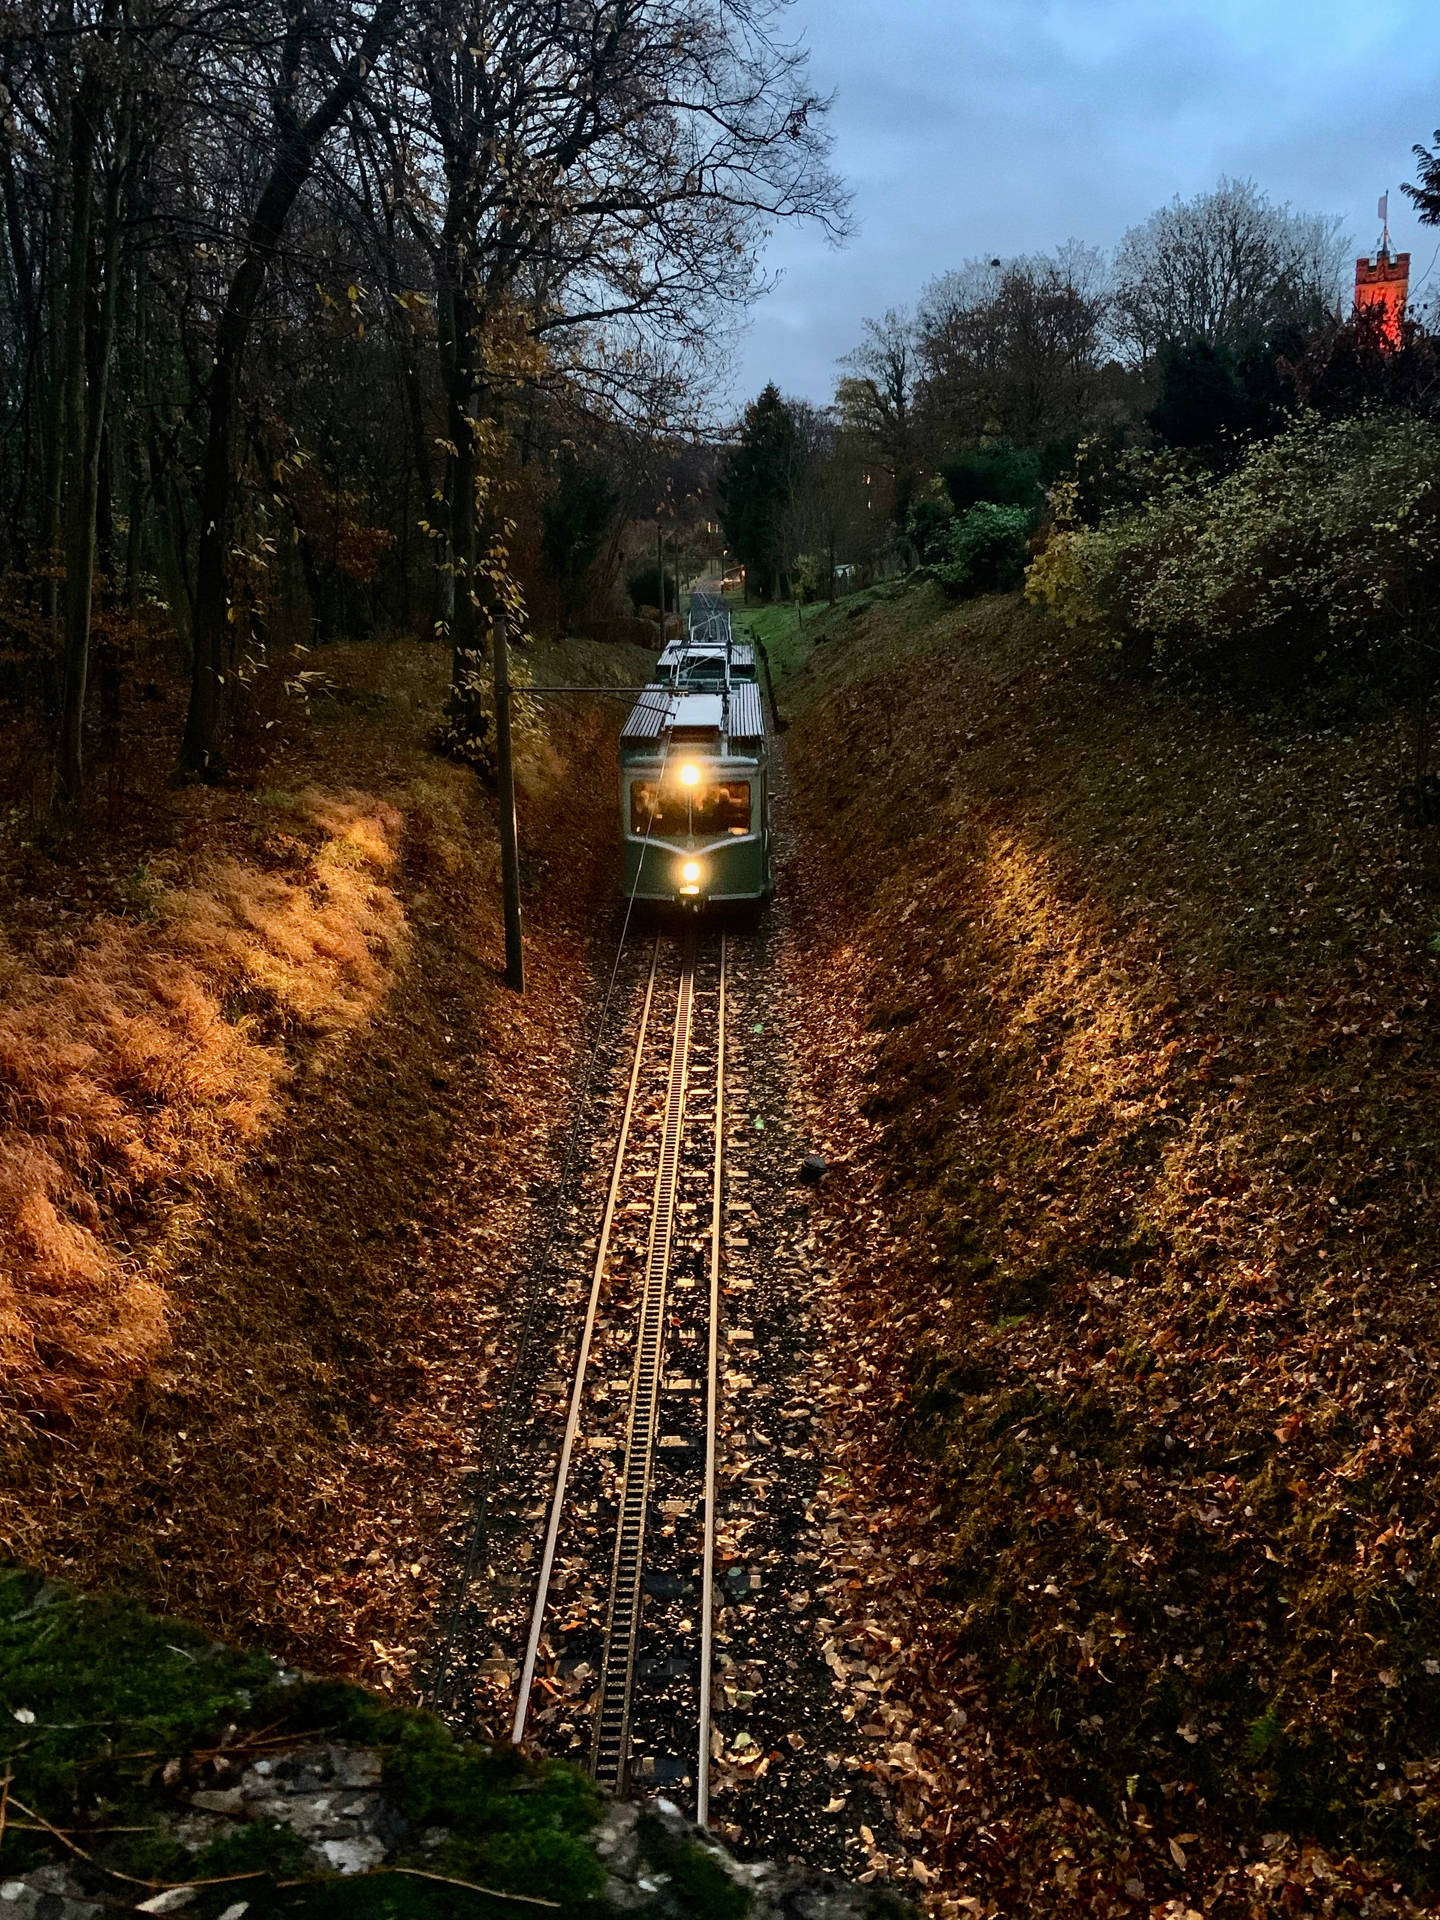 A Train travelling through the countryside Wallpaper